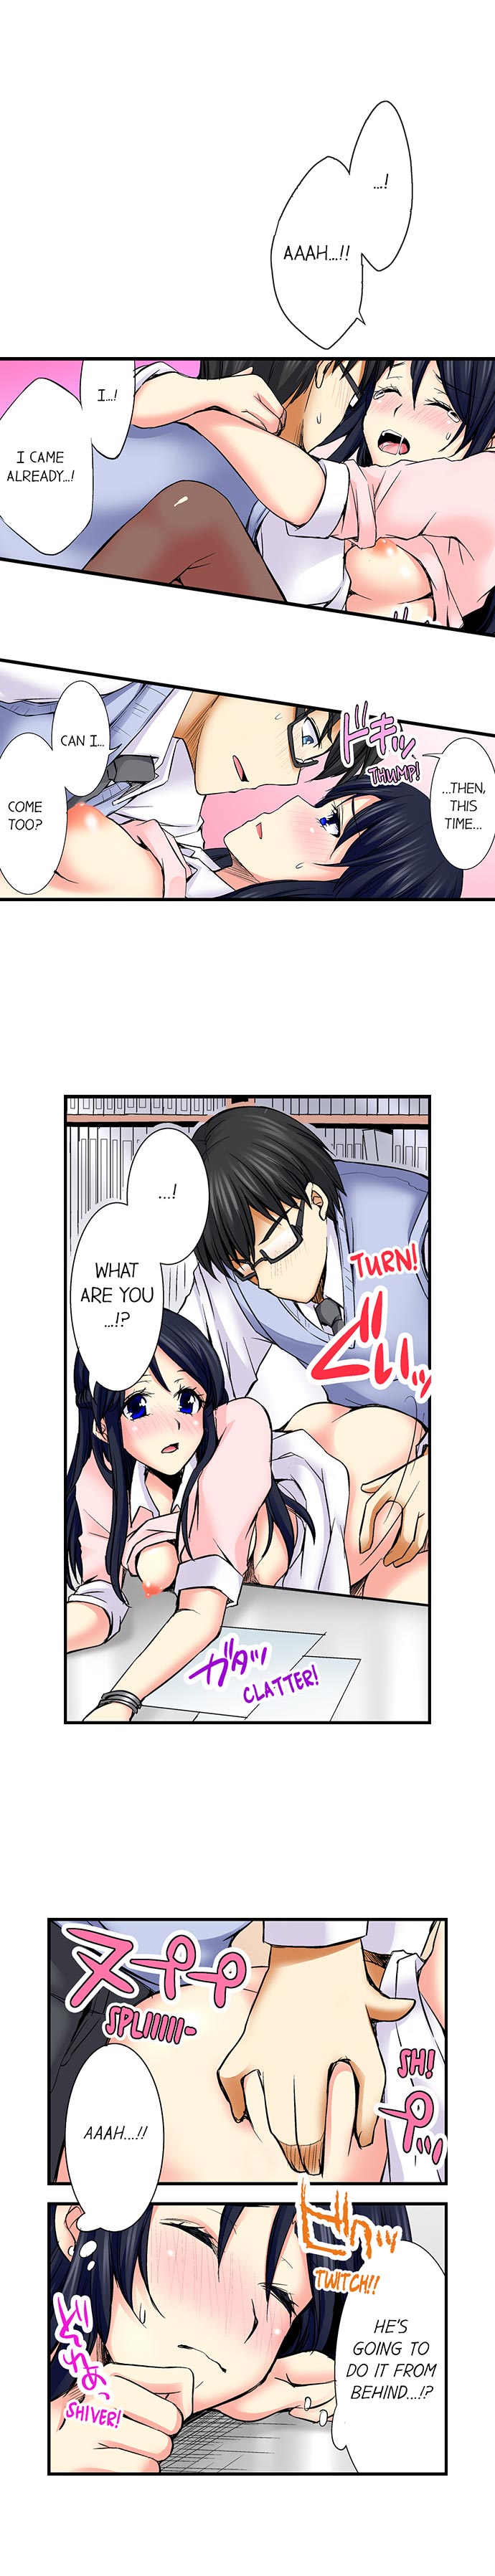 Why Can't i Have Sex With My Teacher? - Chapter 15 Page 4